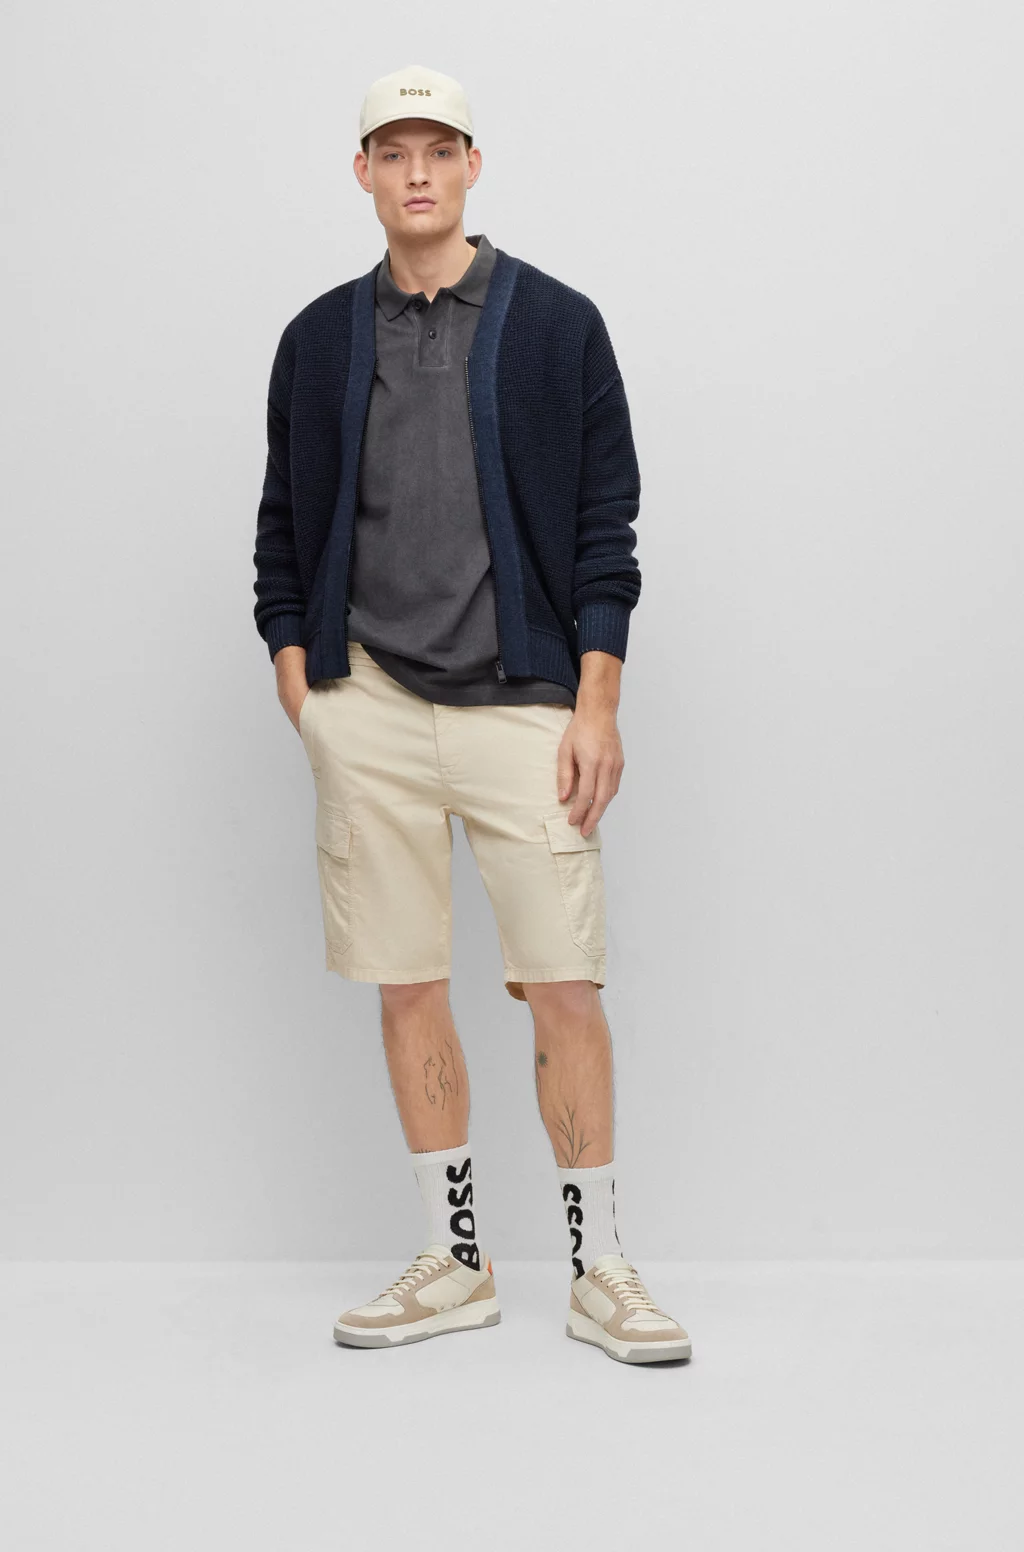 A man wearing a blue cardigan, beige shorts, and sneakers